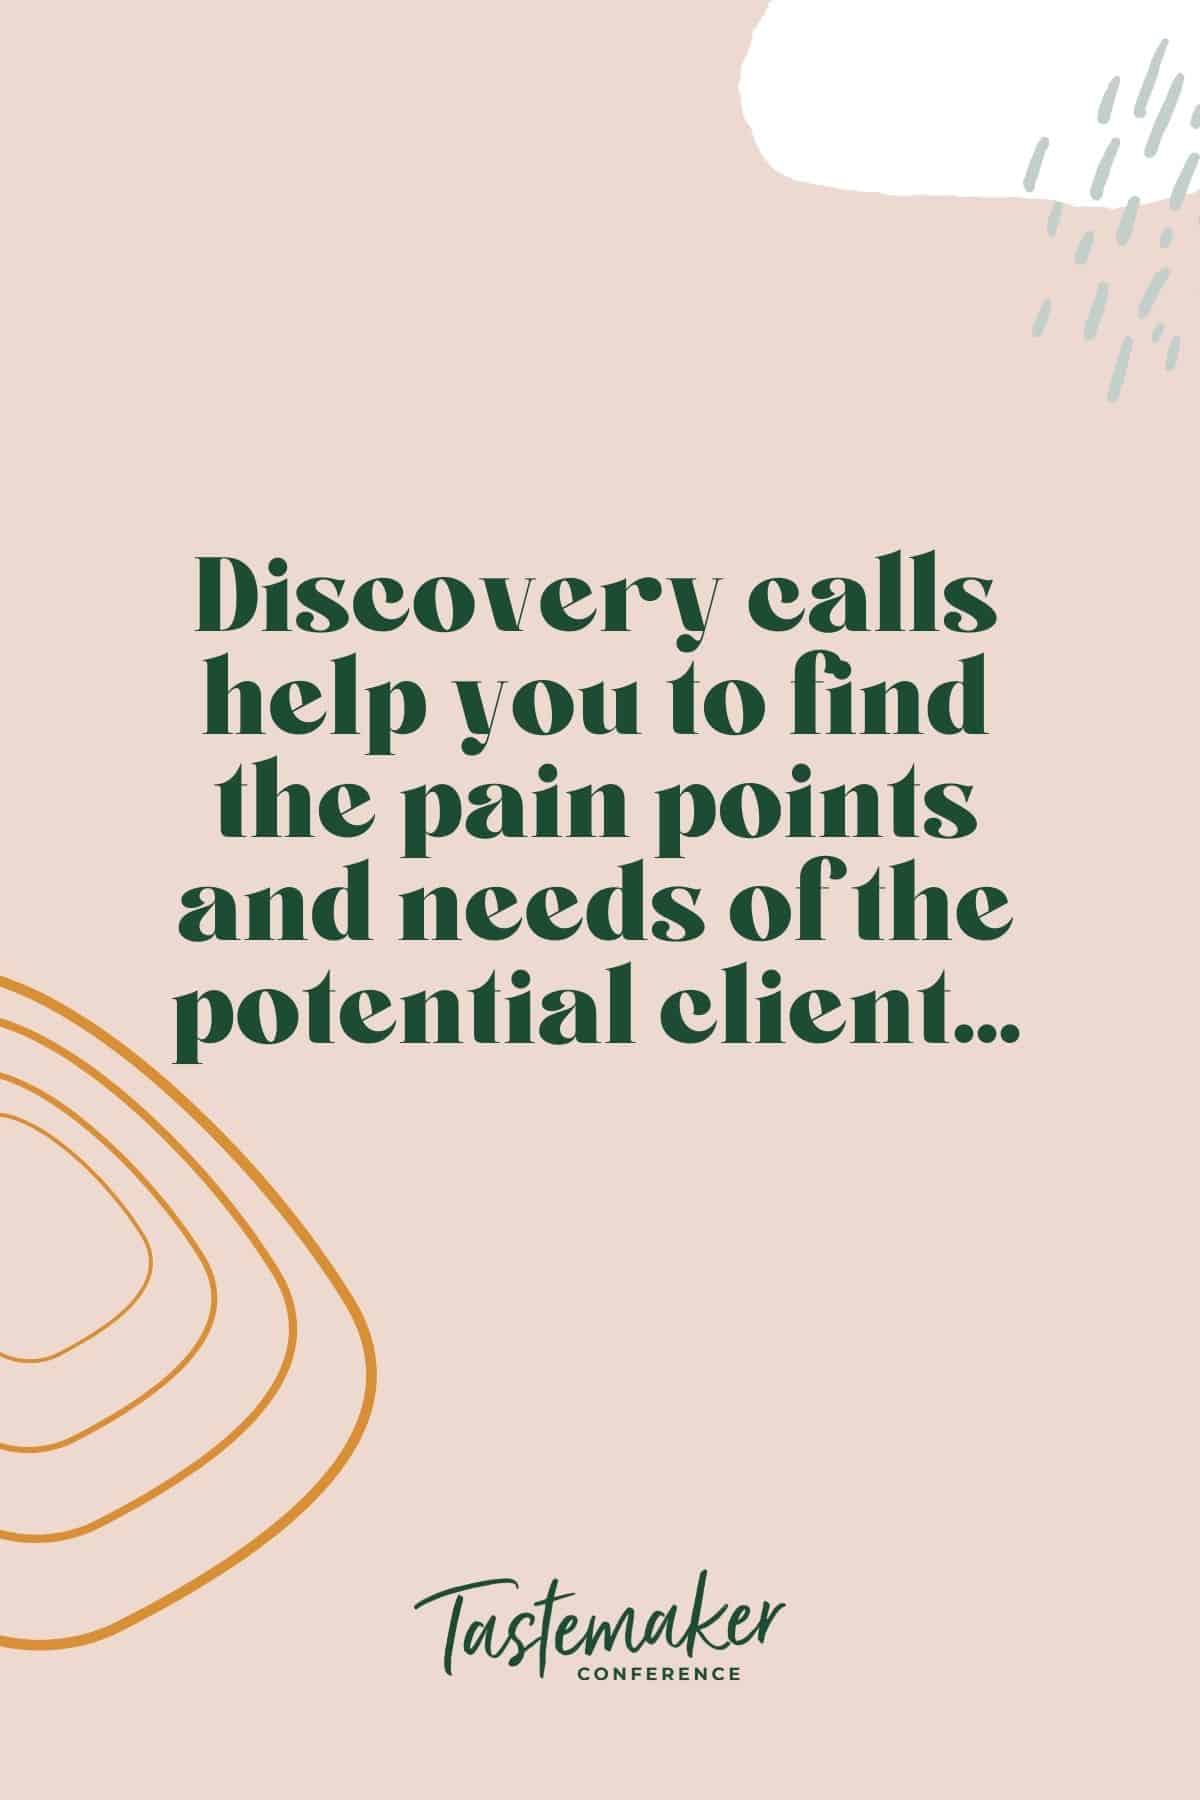 pink graphic with green writing saying discovery calls help you find the pain points of potential clients